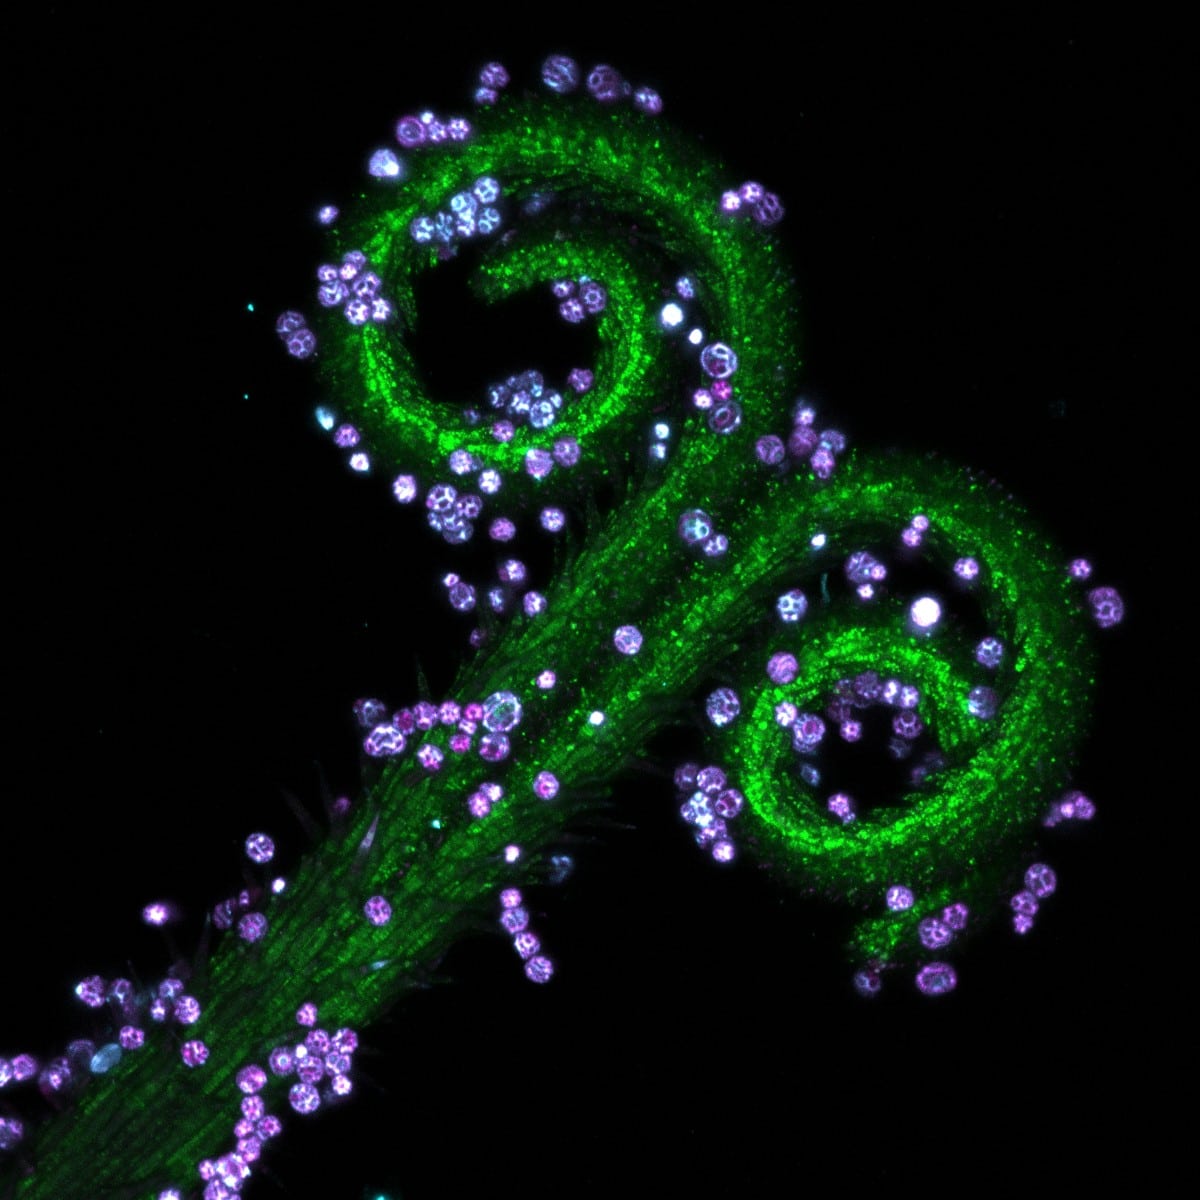 Pistils of dandelion were collected and made into slide samples. Different fluorescence patterns of its parts were observed using confocal microscopy.